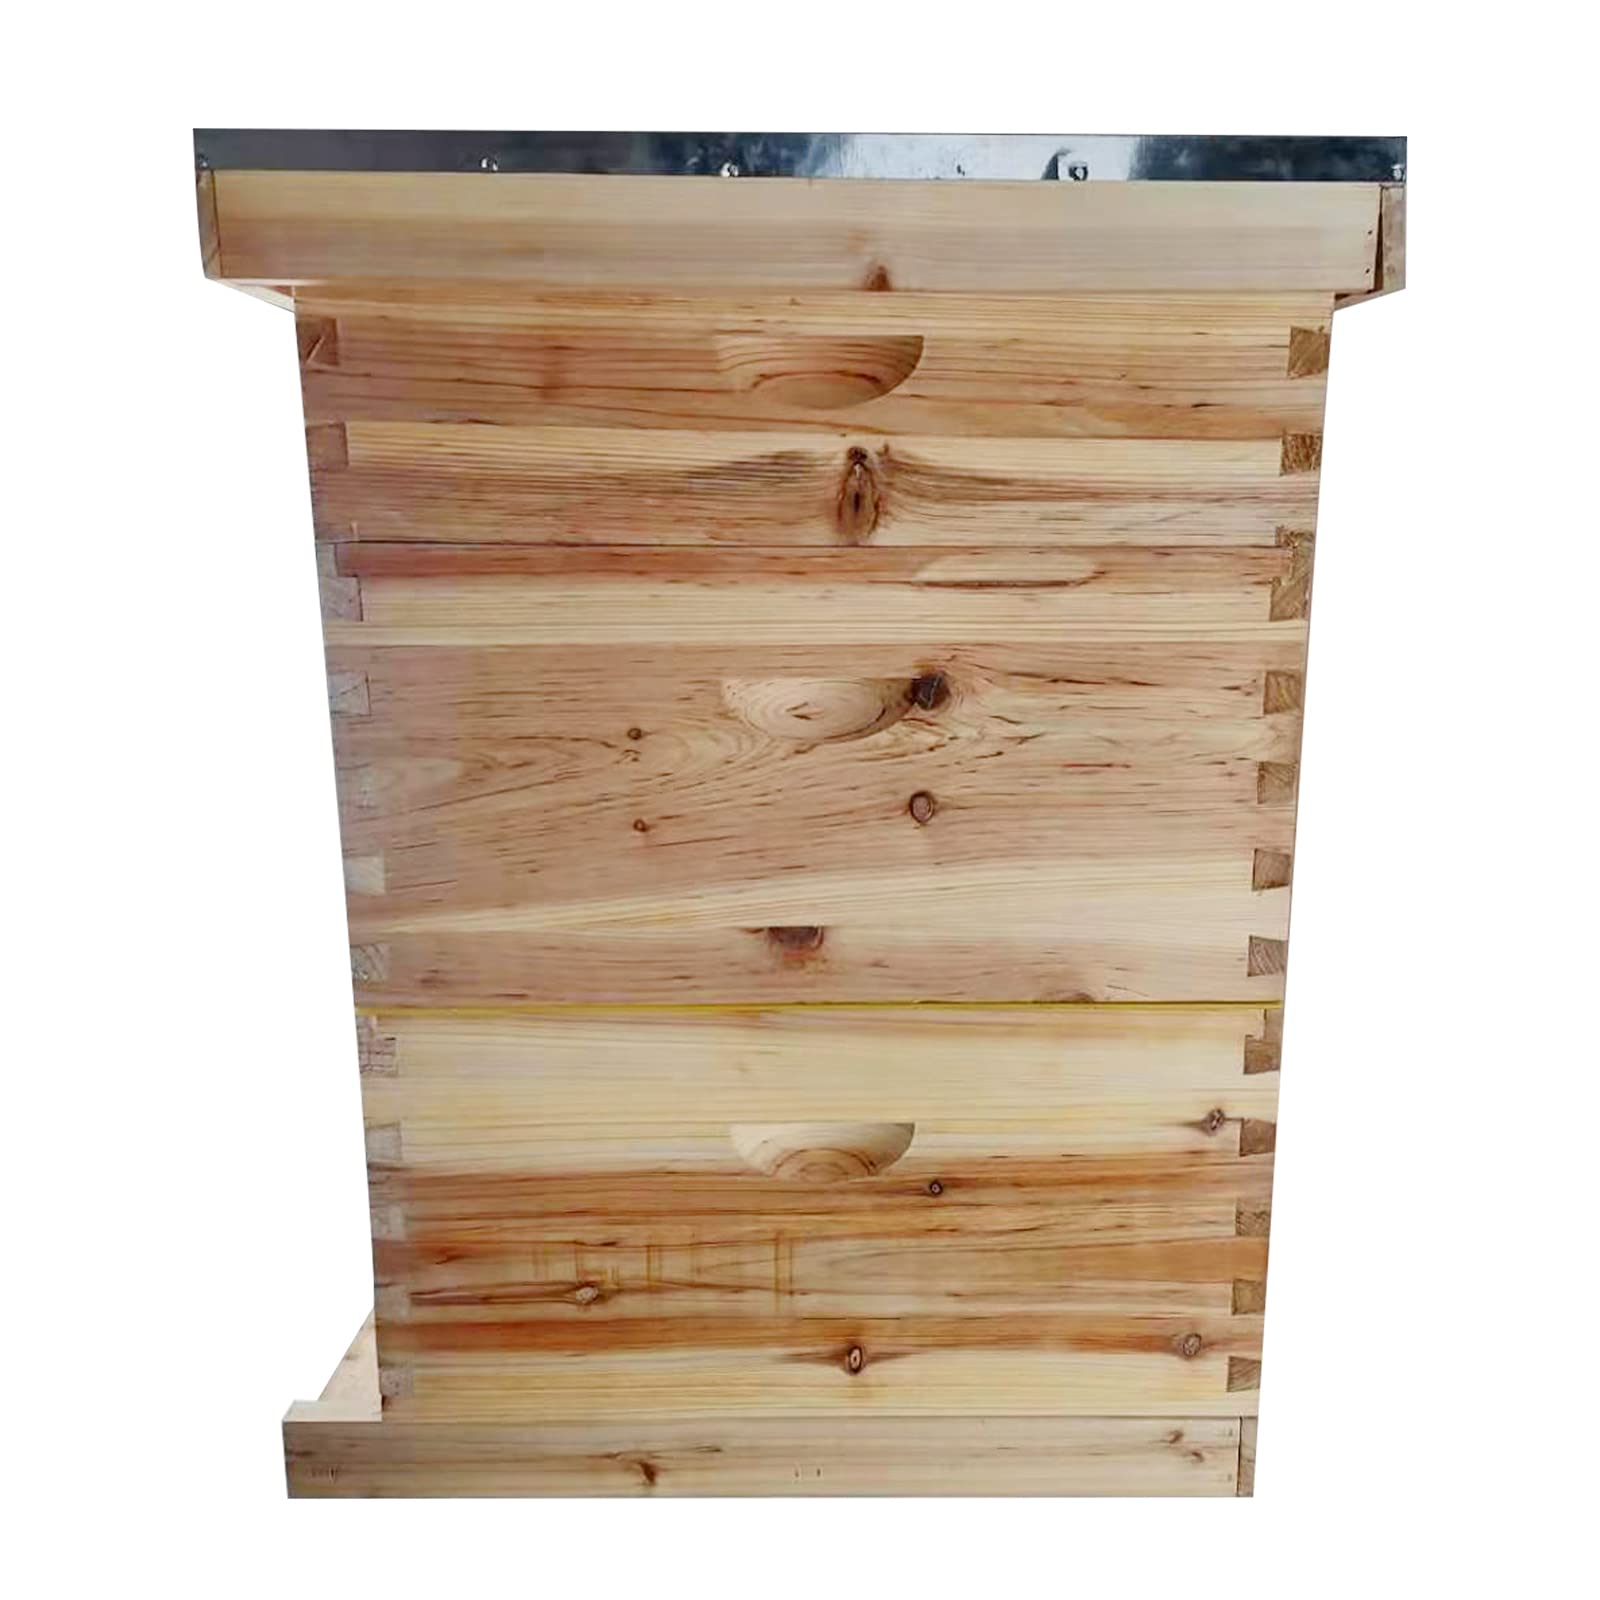 10 Frames Wooden Bee House Complete Honey Bee Box 